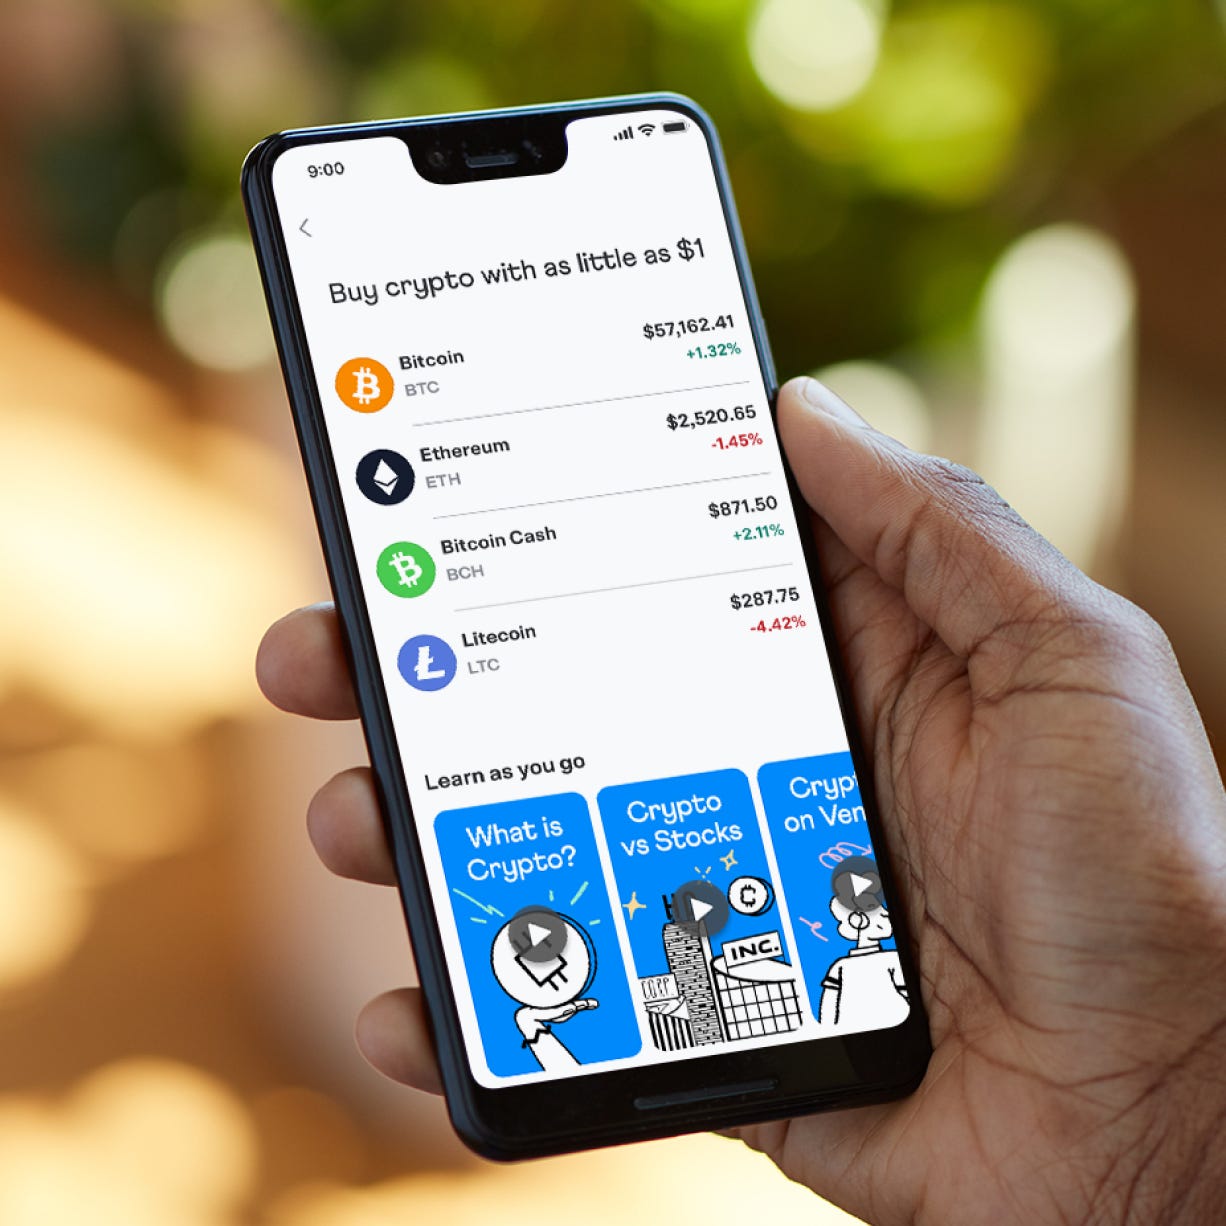 New Venmo feature lets users transfer crypto | Fortune Crypto